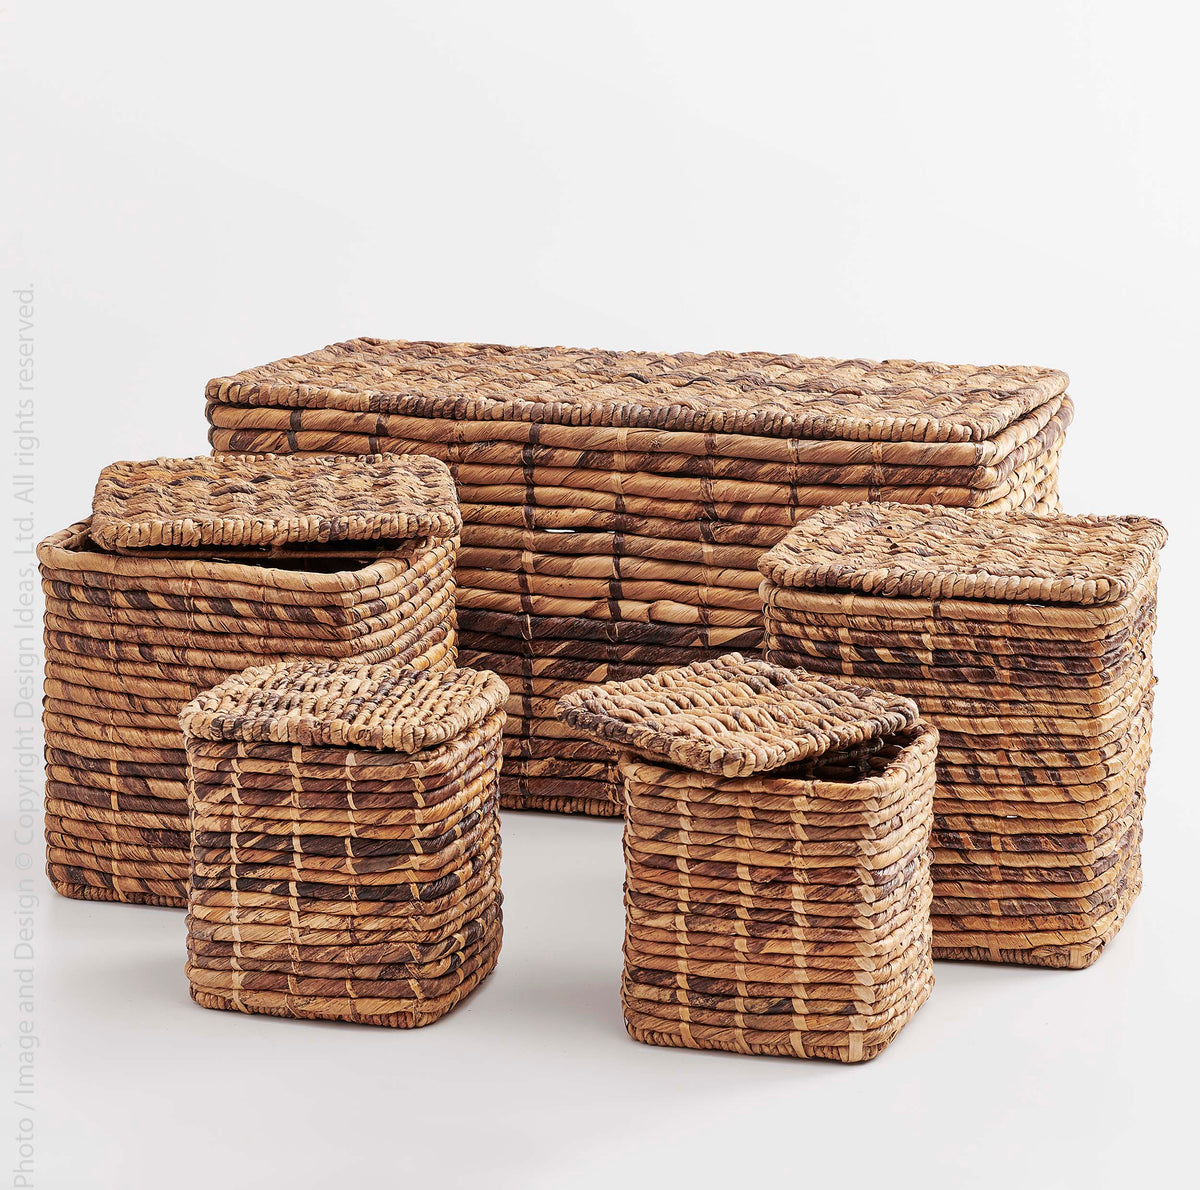 Wentworth™ Woven Abaca Basket (set of 5) - texxture™ – texxture 